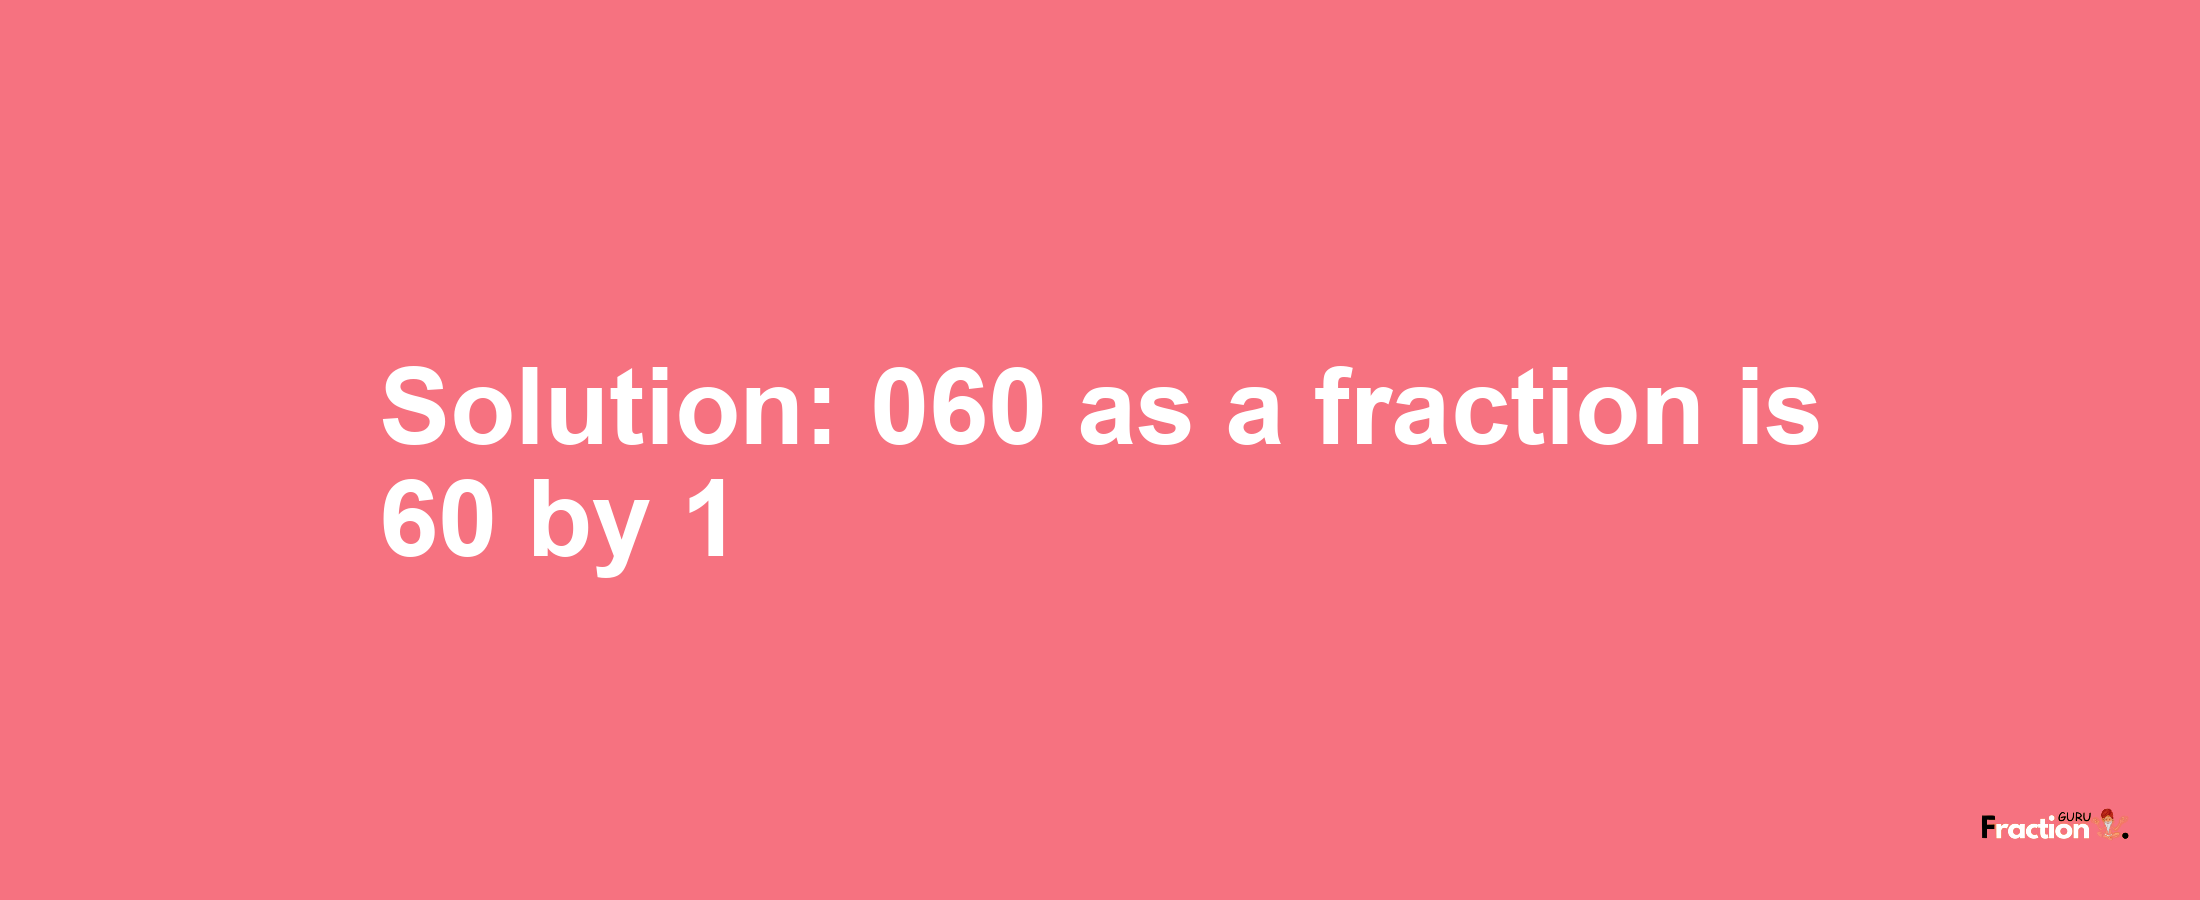 Solution:060 as a fraction is 60/1